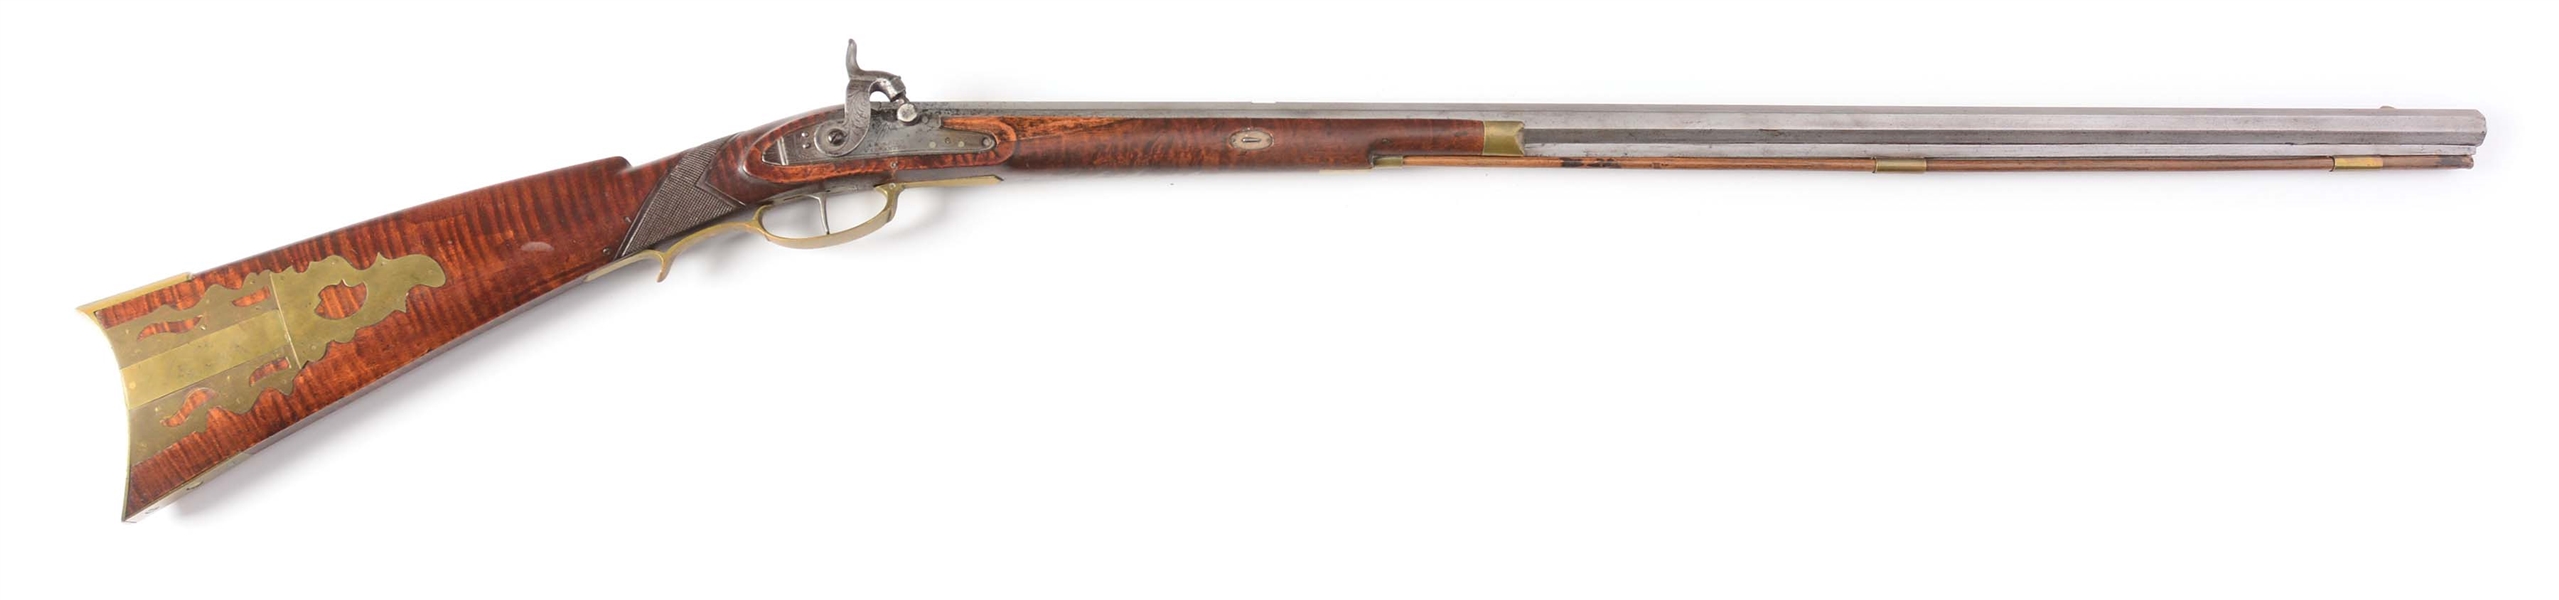 (A) A.W. SPIES WARRANTED PERCUSSION HALF-STOCK KENTUCKY RIFLE.